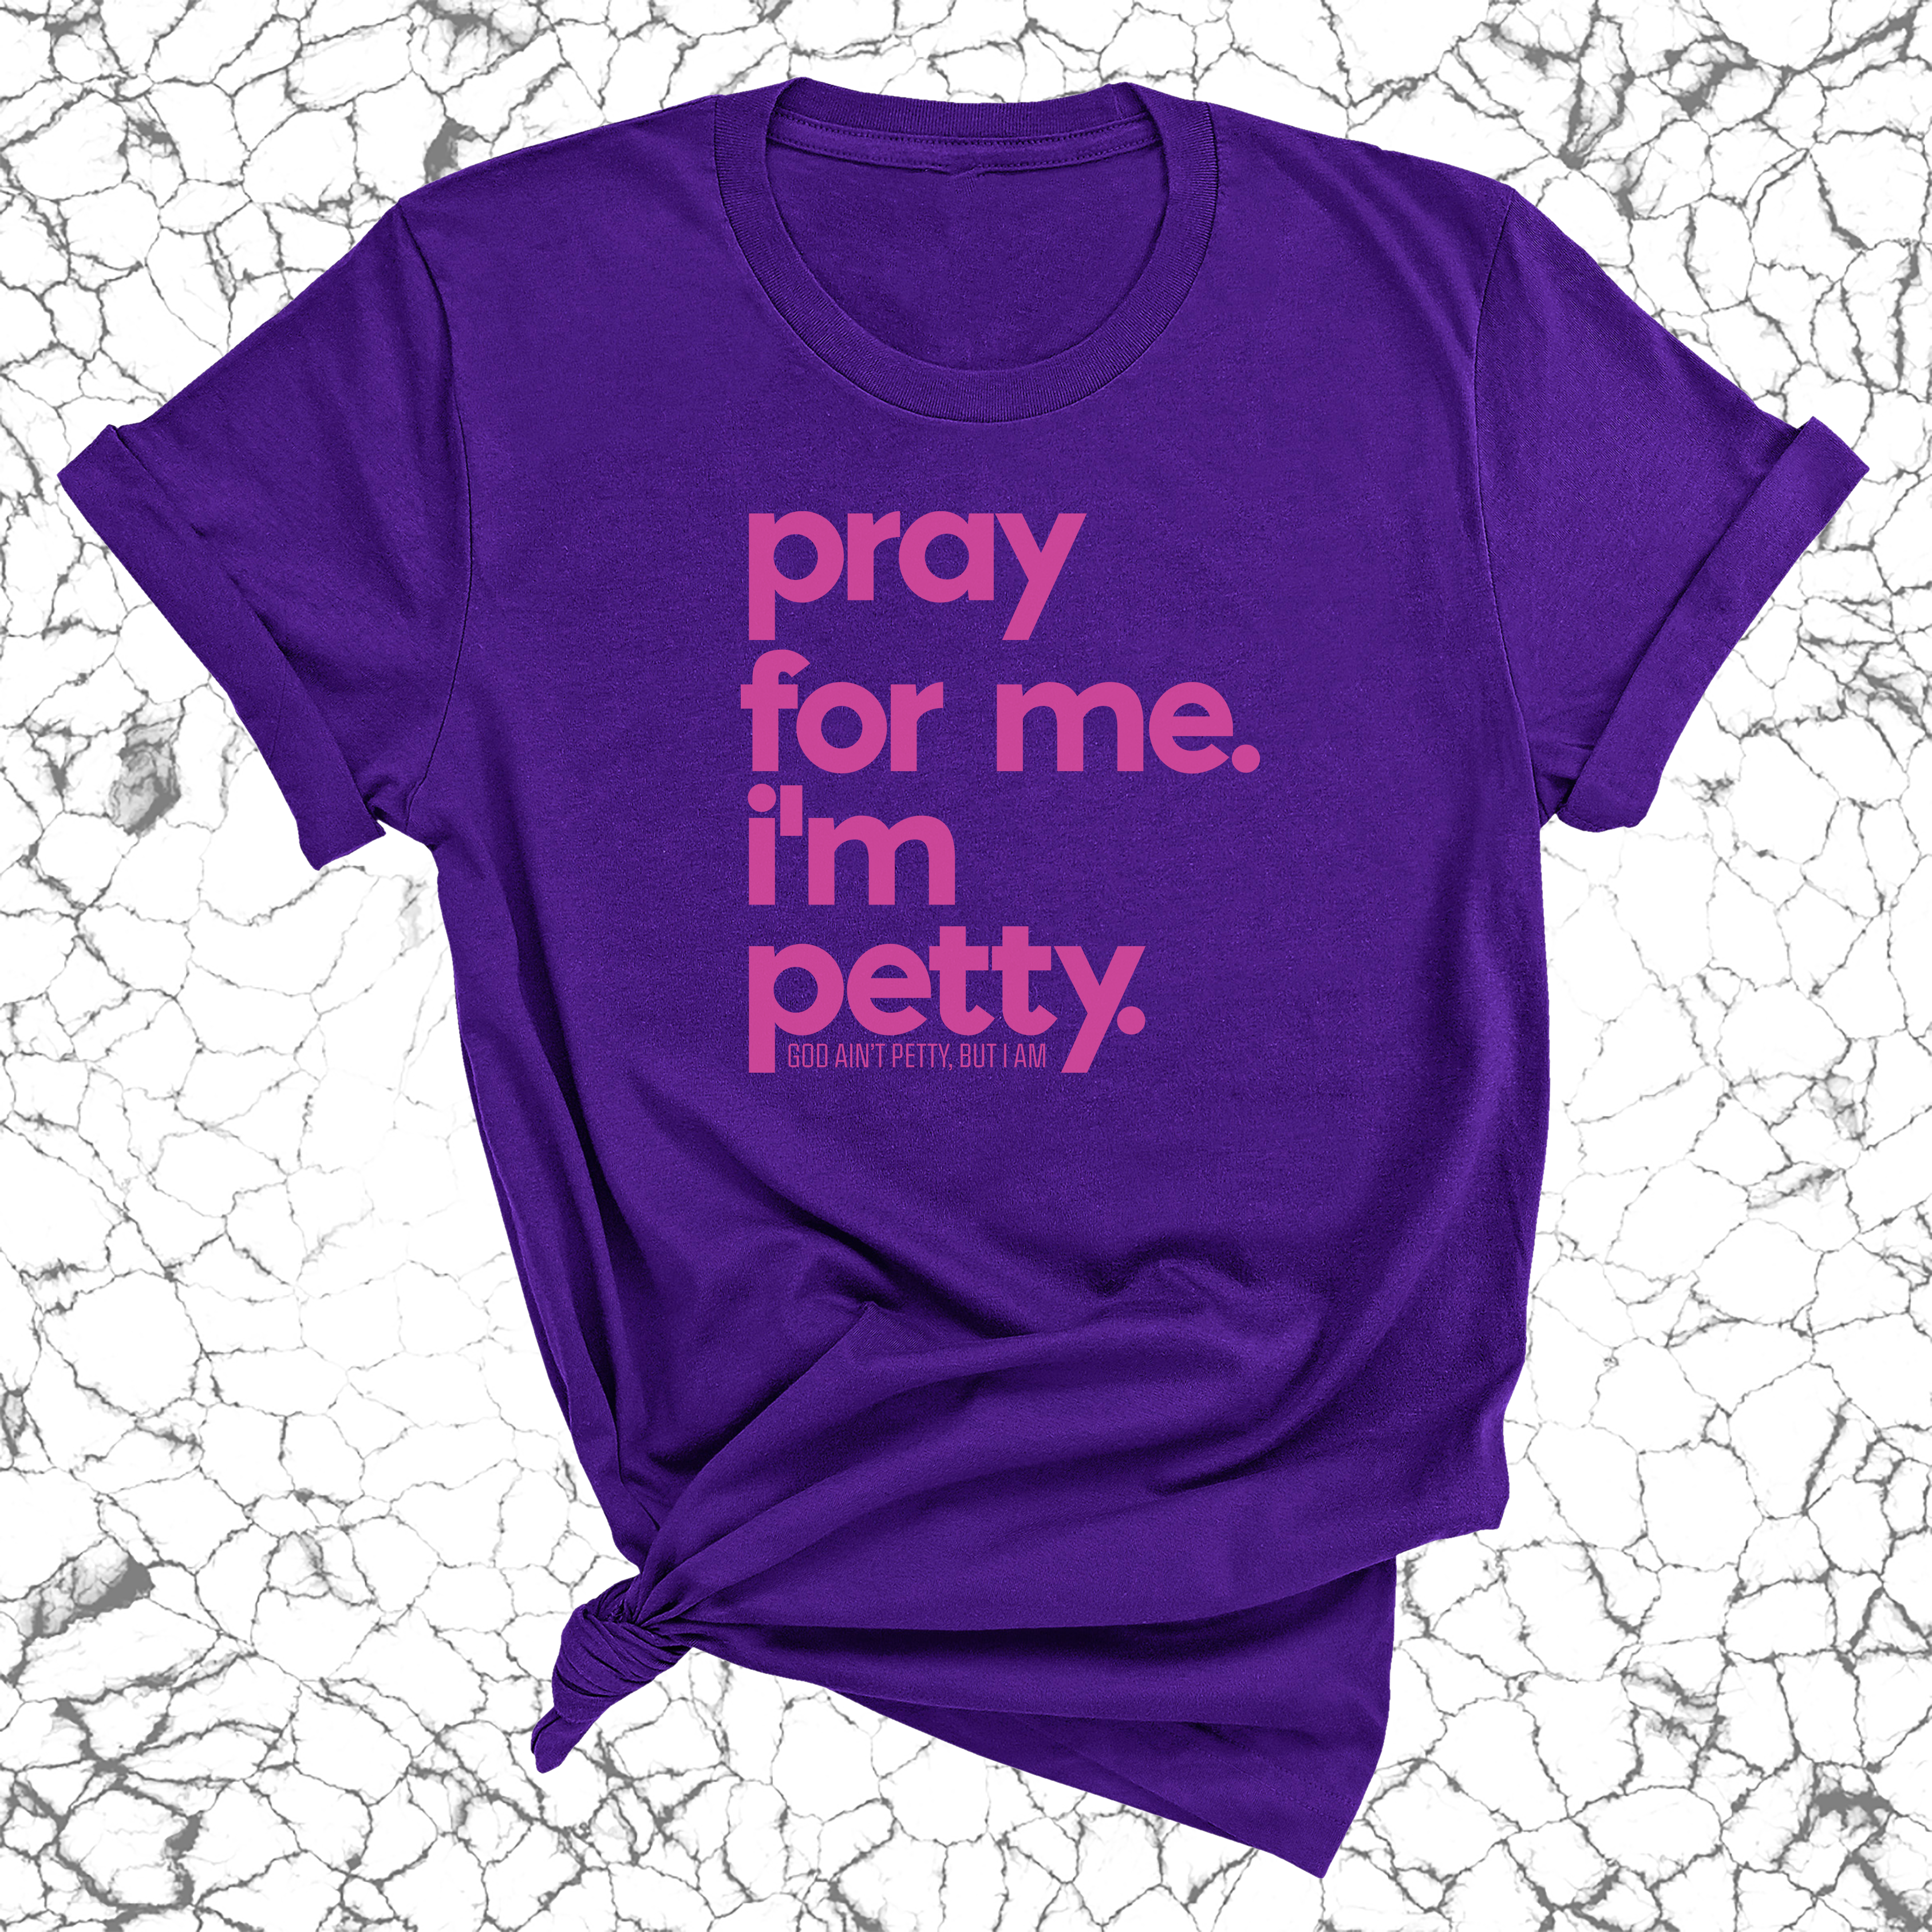 Pray for me. I'm Petty Unisex Tee *Limited Edition*-T-Shirt-The Original God Ain't Petty But I Am